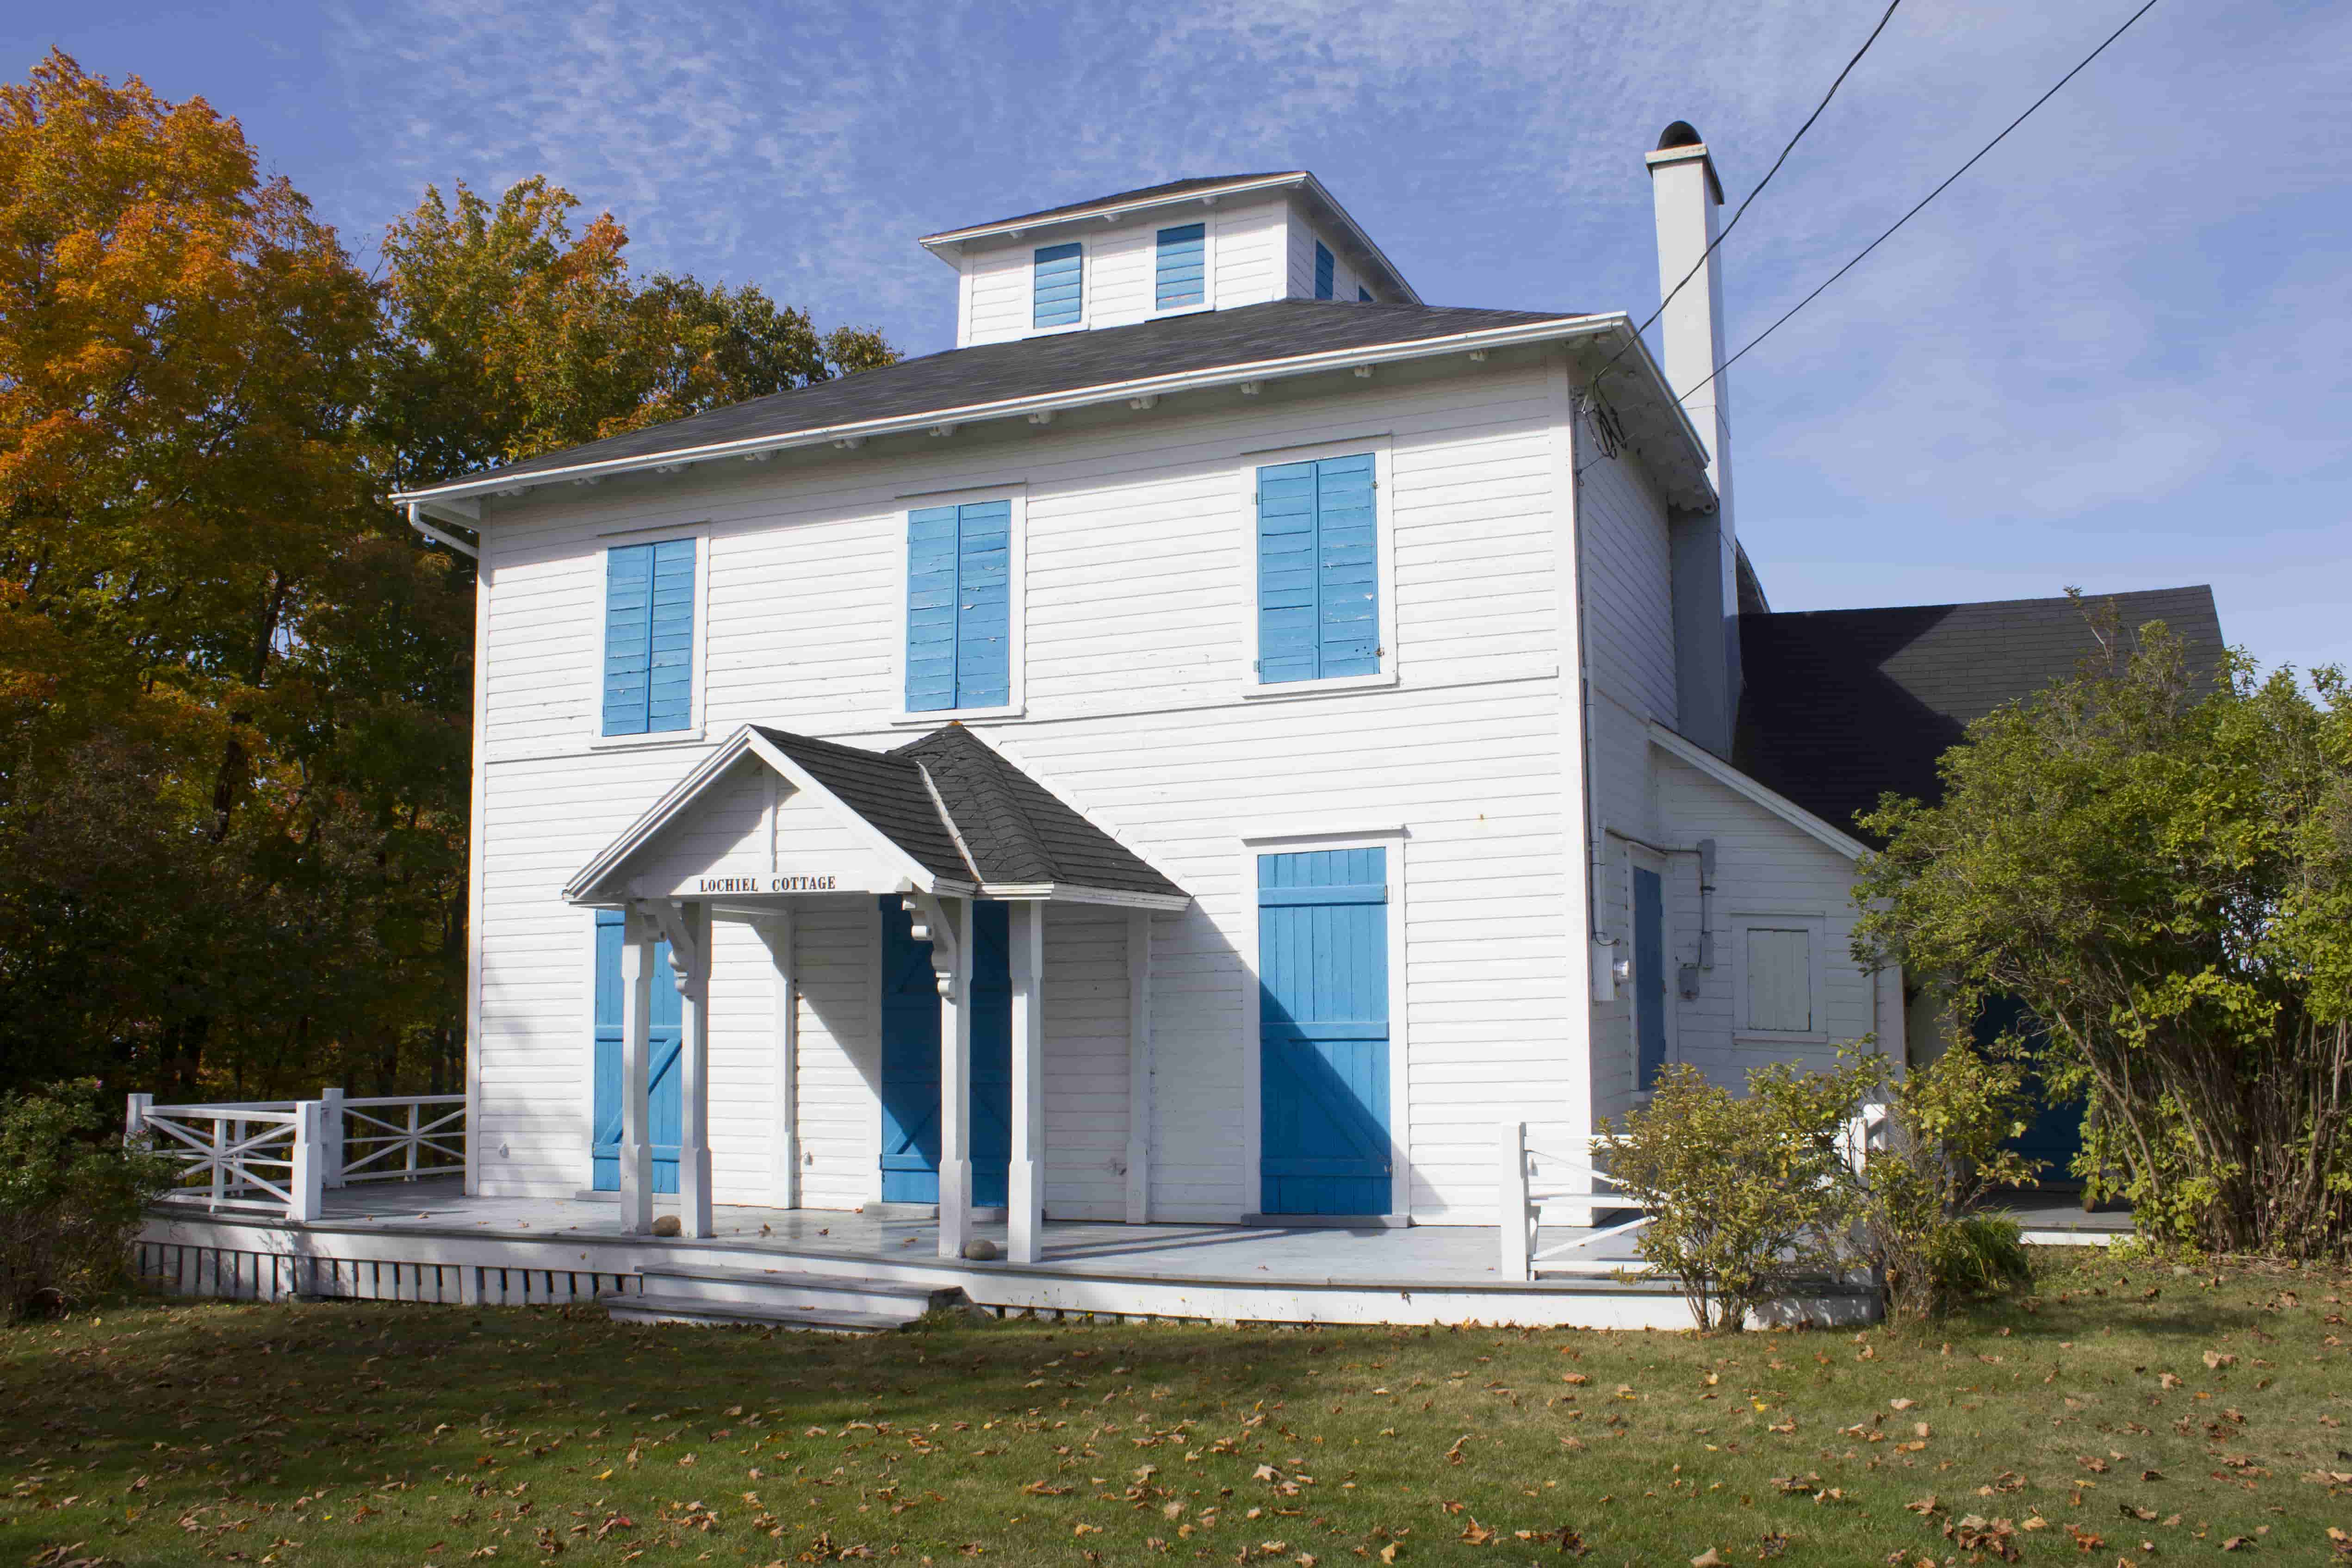 A large white house with closed blue shutters.